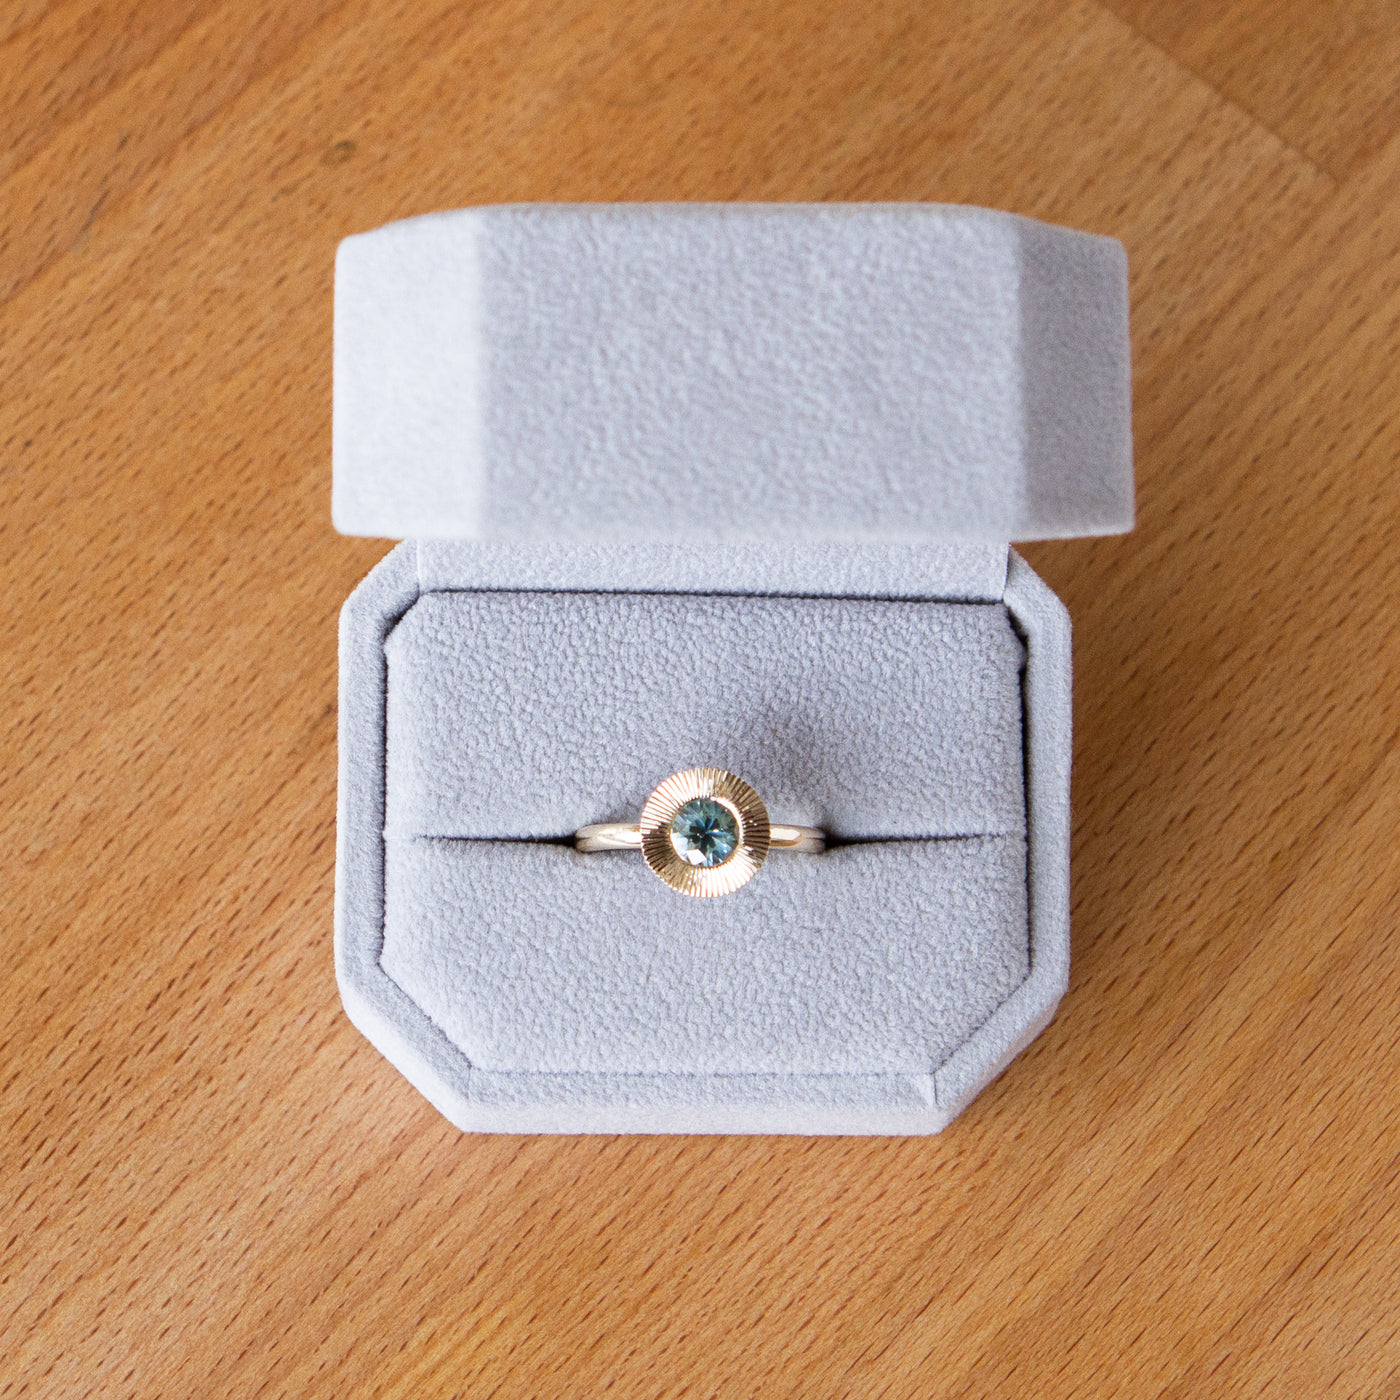 Round mint green Montana sapphire in a 14k yellow gold Aurora ring with an engraved halo border in a gift box